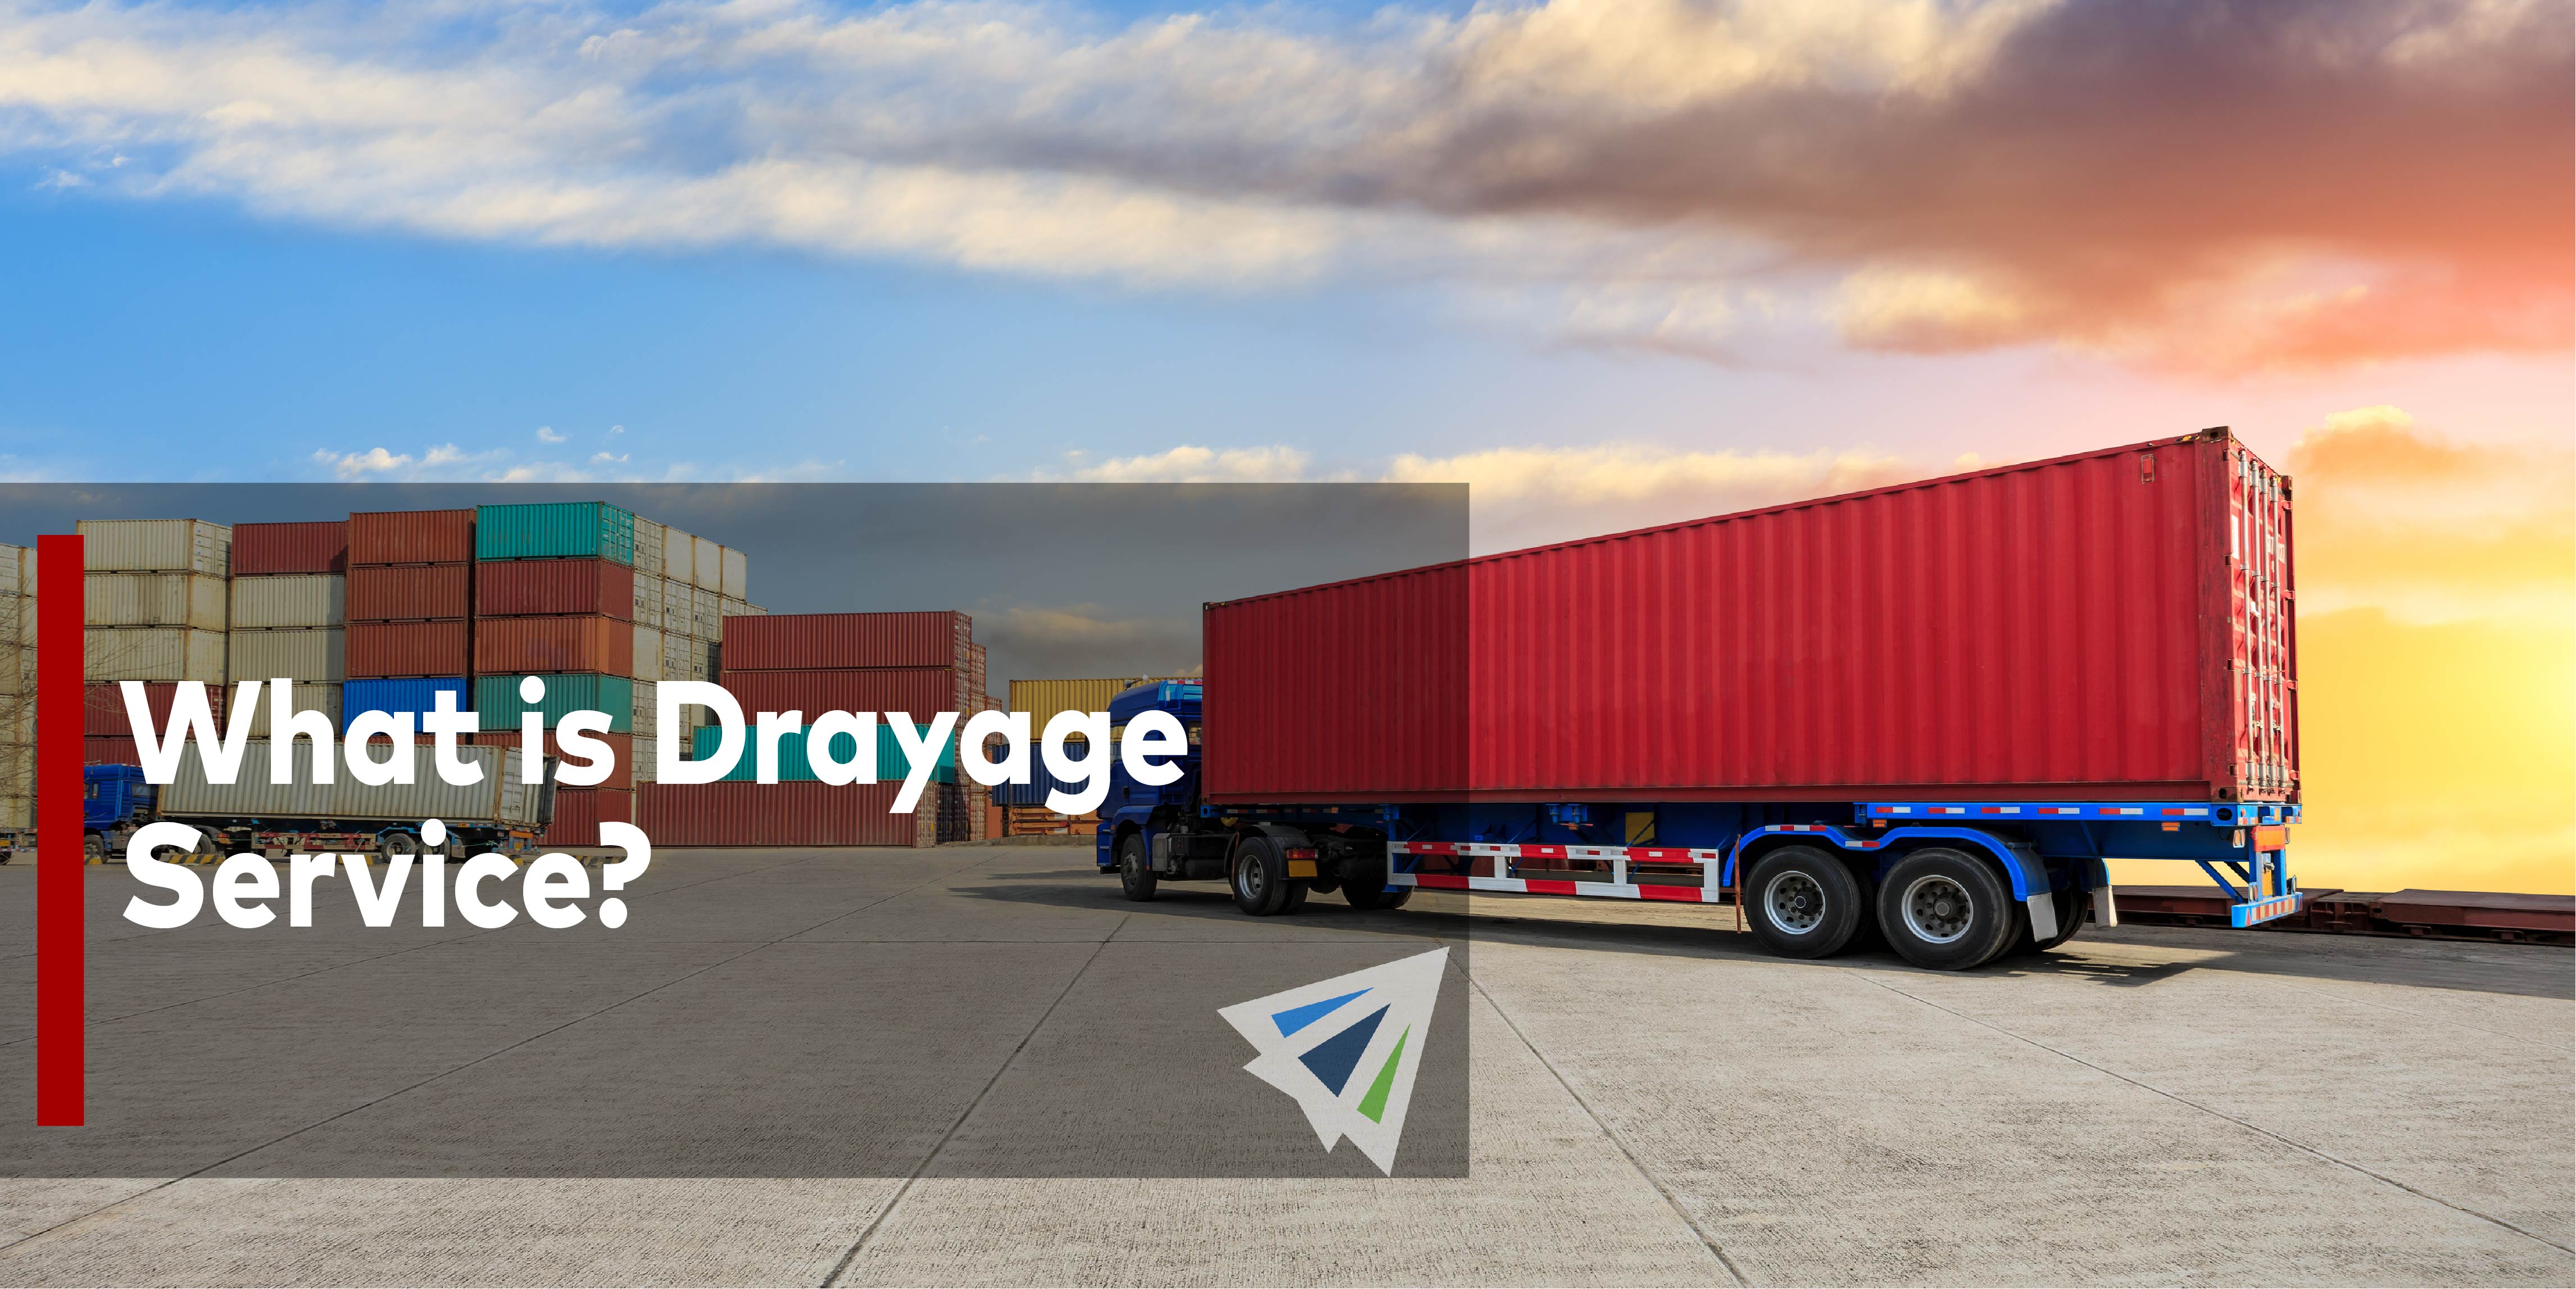 What is Drayage Service